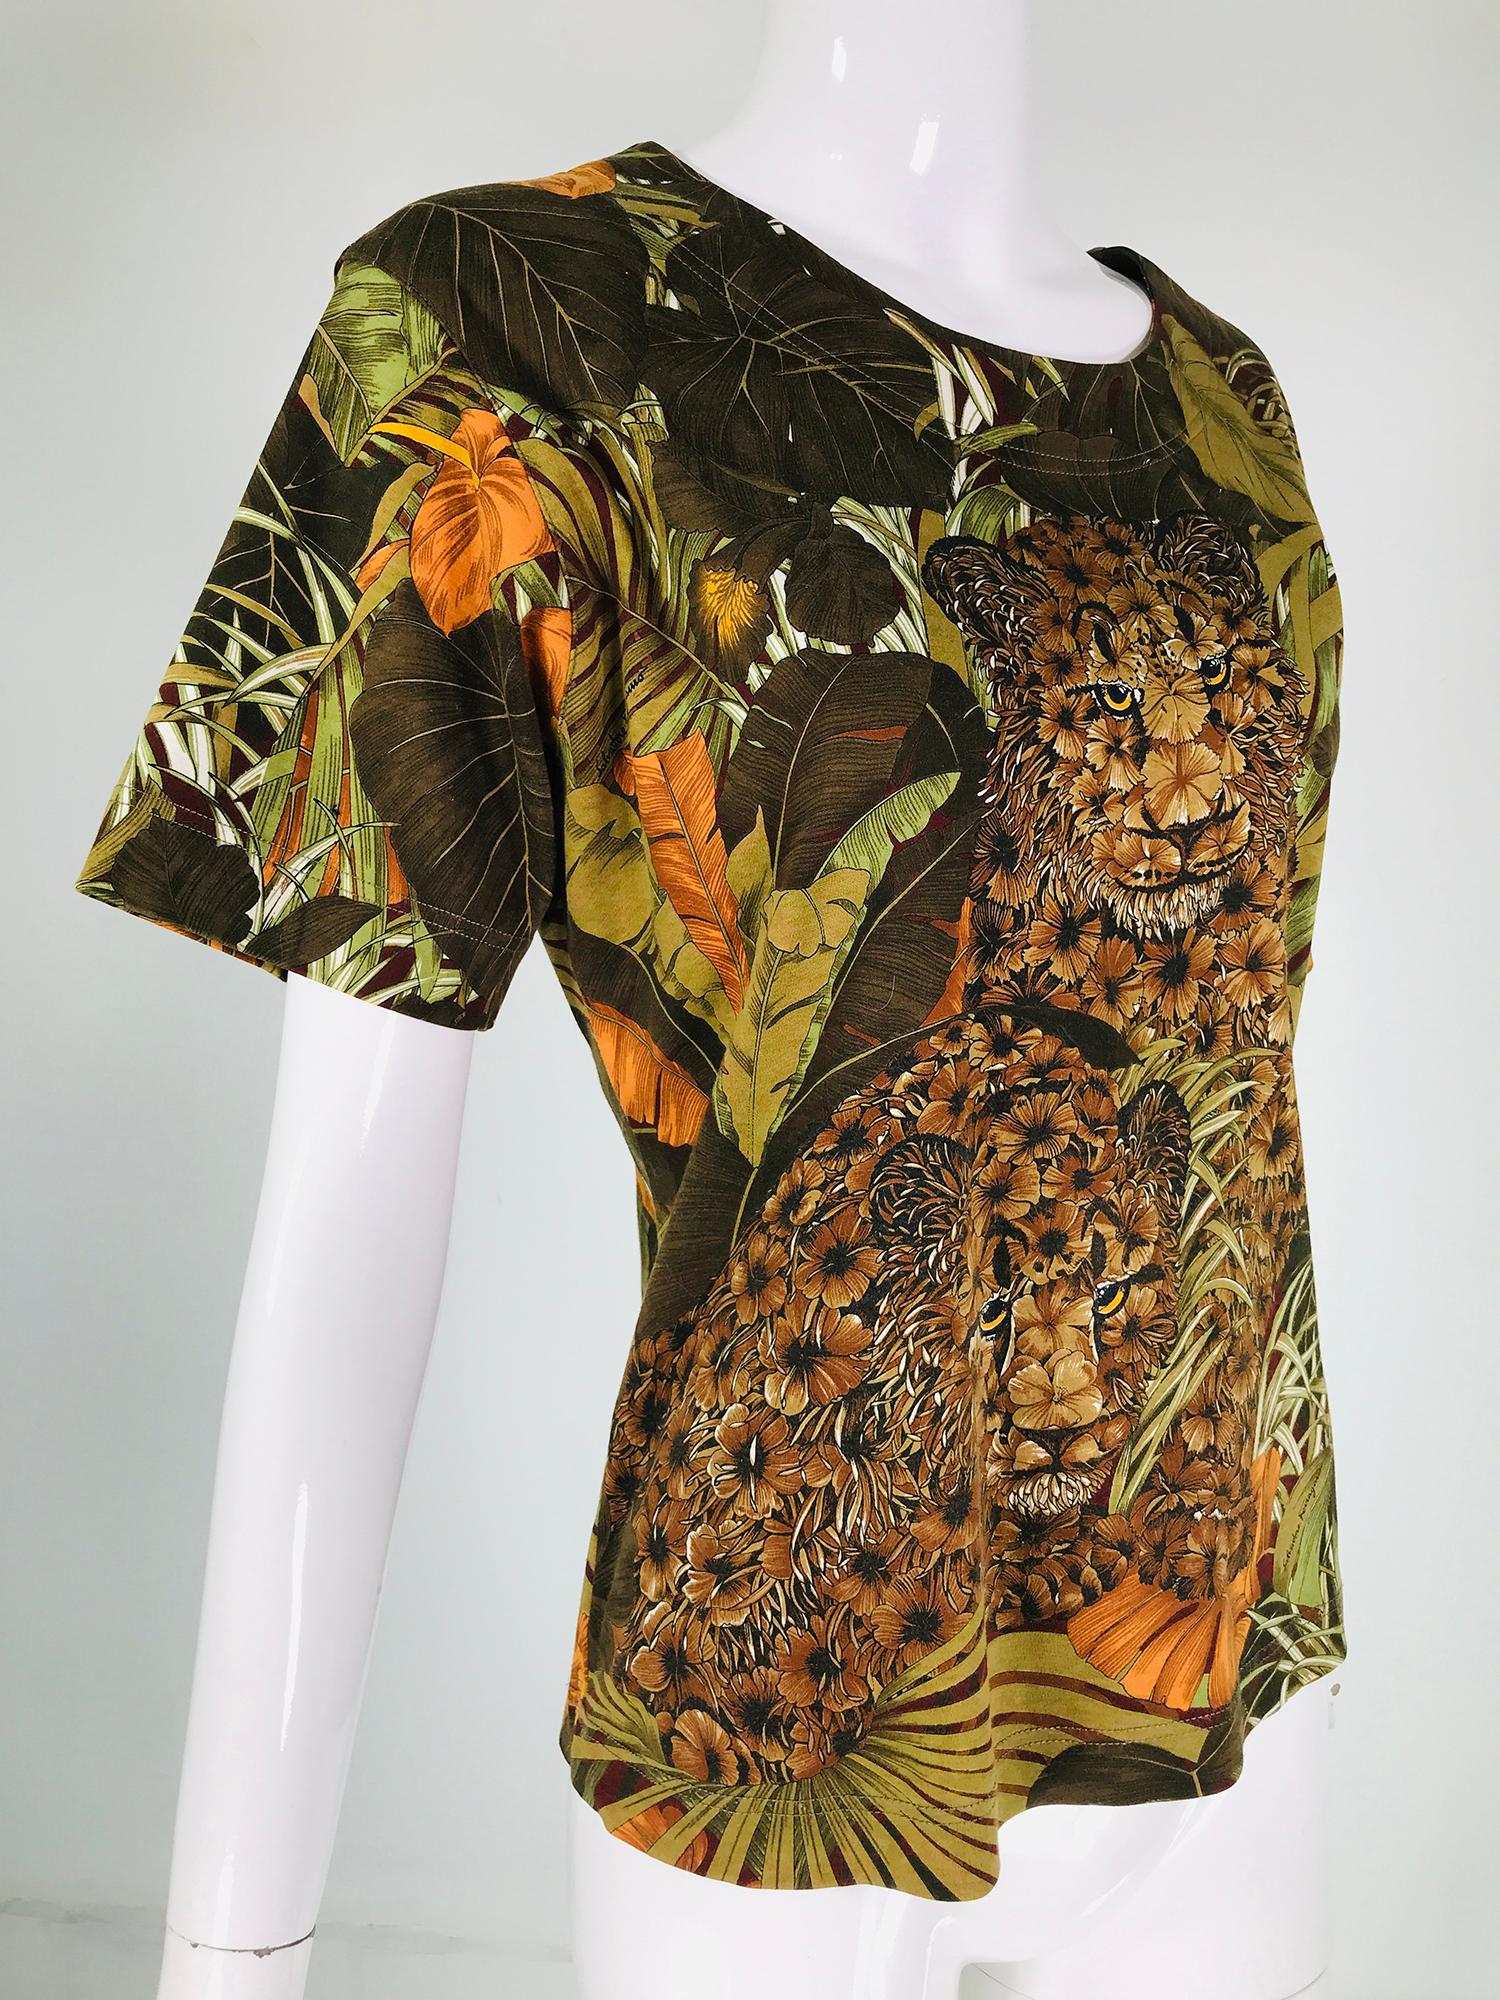 Salvatore Ferragamo jungle cats cotton knit short sleeve shirt. Pull on shirt with finished neck, sleeves & hem in medium weight fine cotton. The print is in shades of greens, browns & oranges, with jungle flora & fauna, center front is a fantasy